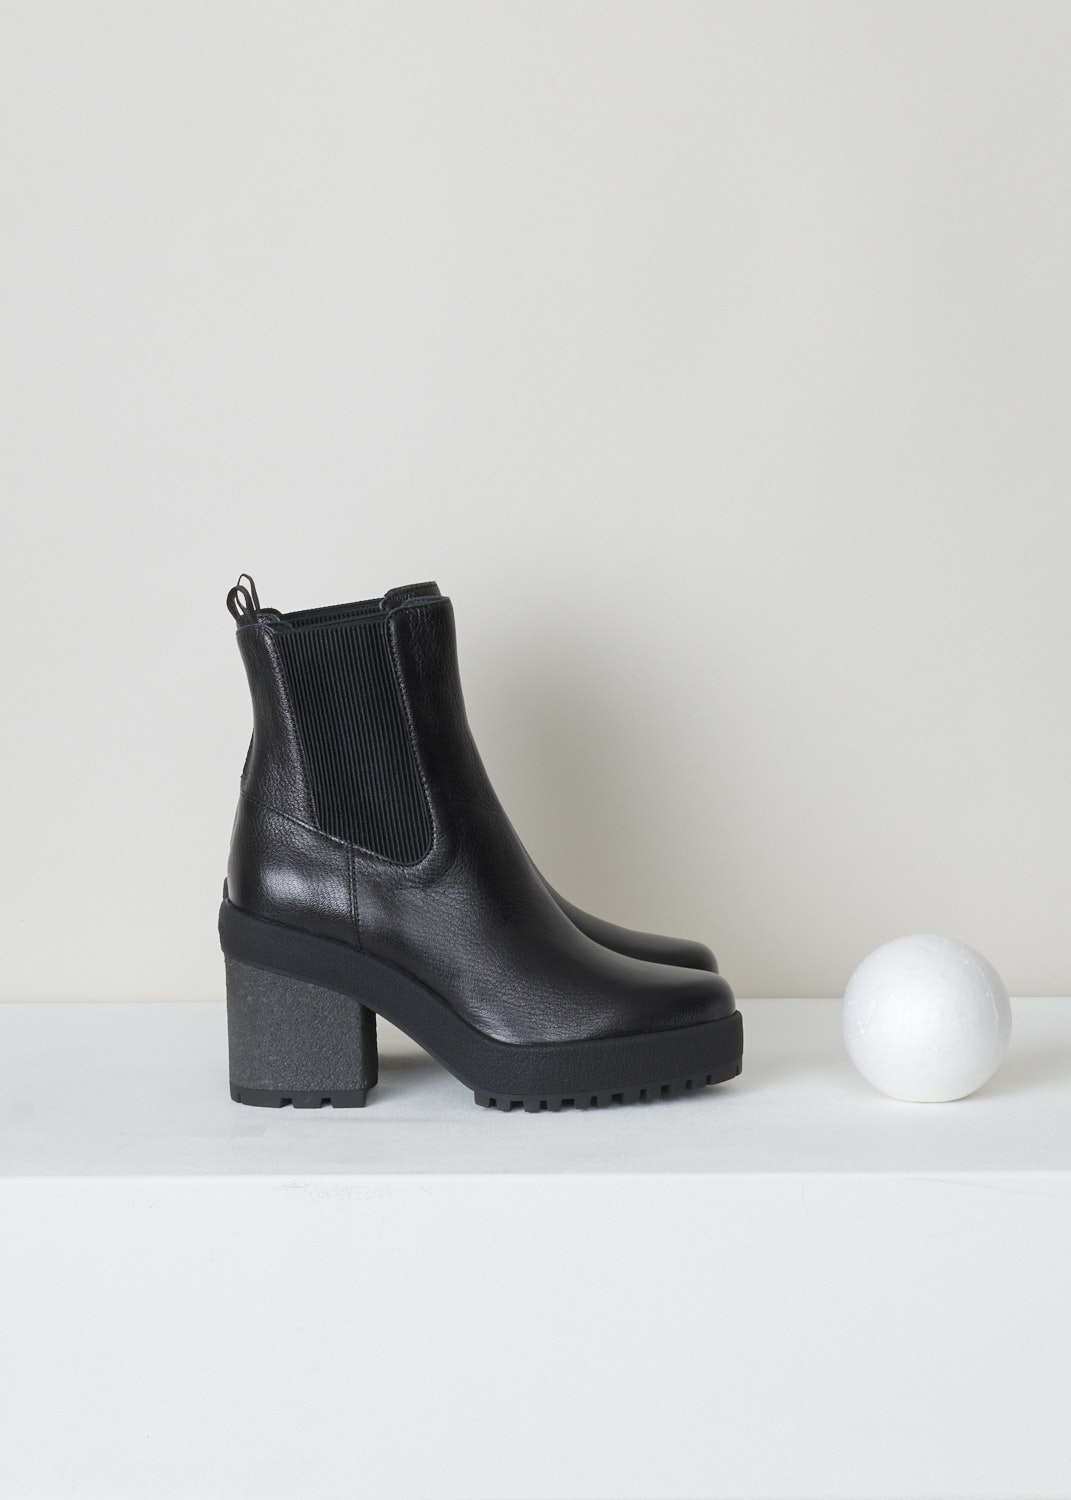 Hogan, Black pebble grain chelsea boots, HXW4750BZ70LF7B999_LF6_nero, black, front,  Black chelsea boots featuring a chunky heel and sole, furthermore this model comes with ribbed gusseted sides. The logo branded pull-tab can be found on the back of the shoe.
Heel height: 9 cm / 3.5 inch. 